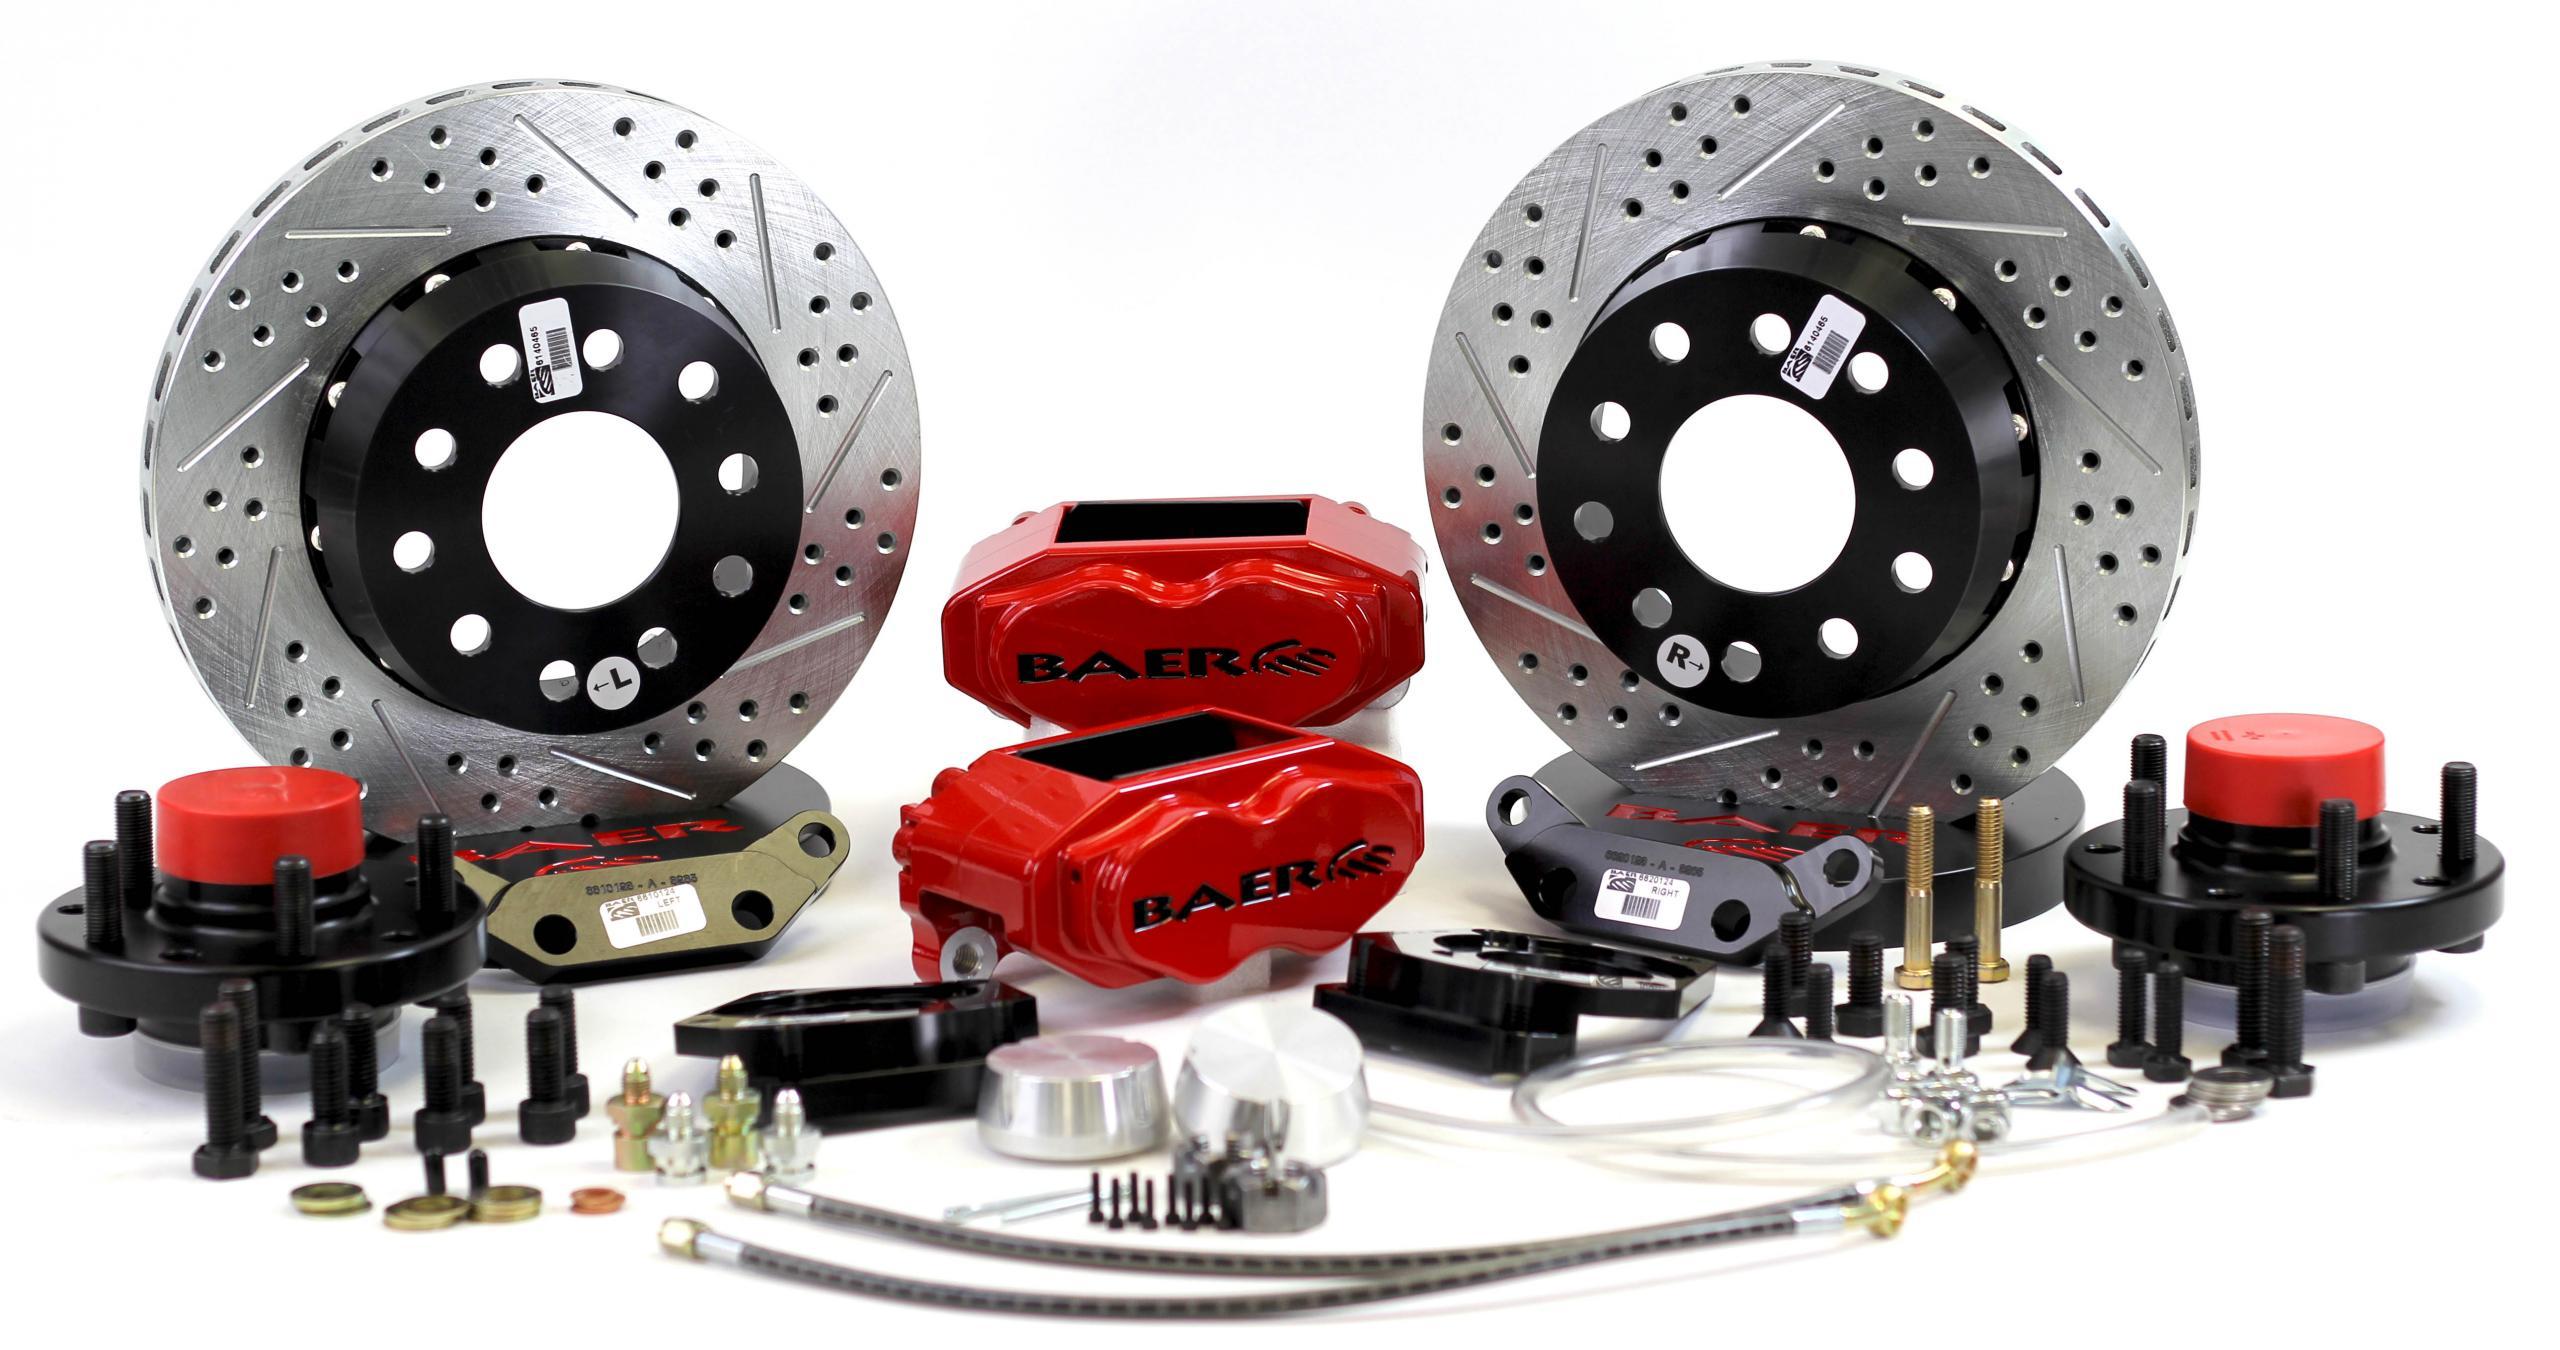 Baer Brakes 4301432R Brake System, SS4 Plus, Front, 4 Piston Caliper, 11.000 in Drilled / Slotted, 2-Piece Rotor, Aluminum, Red, GM A-Body / F-Body / X-Body, Kit